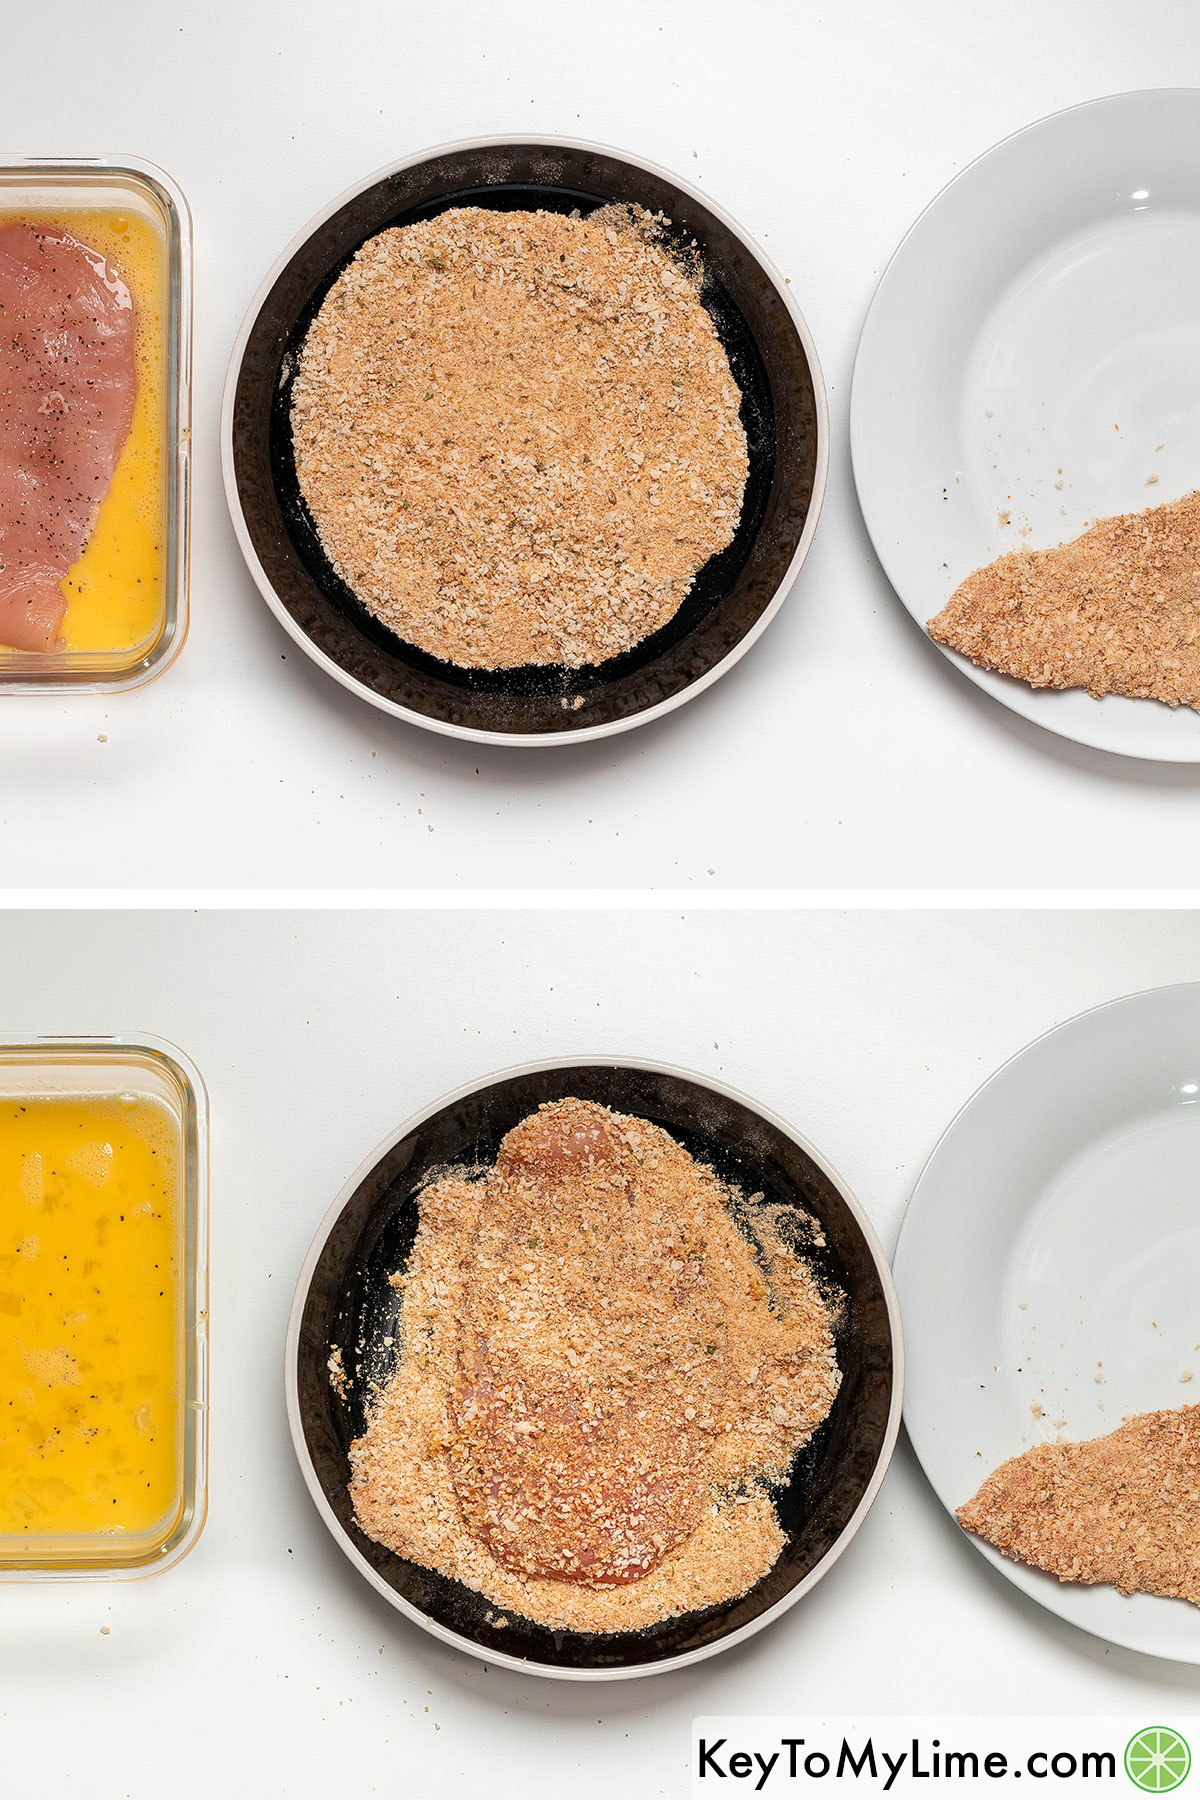 Dredging the chicken cutlets in an egg wash and then coating in breadcrumbs.